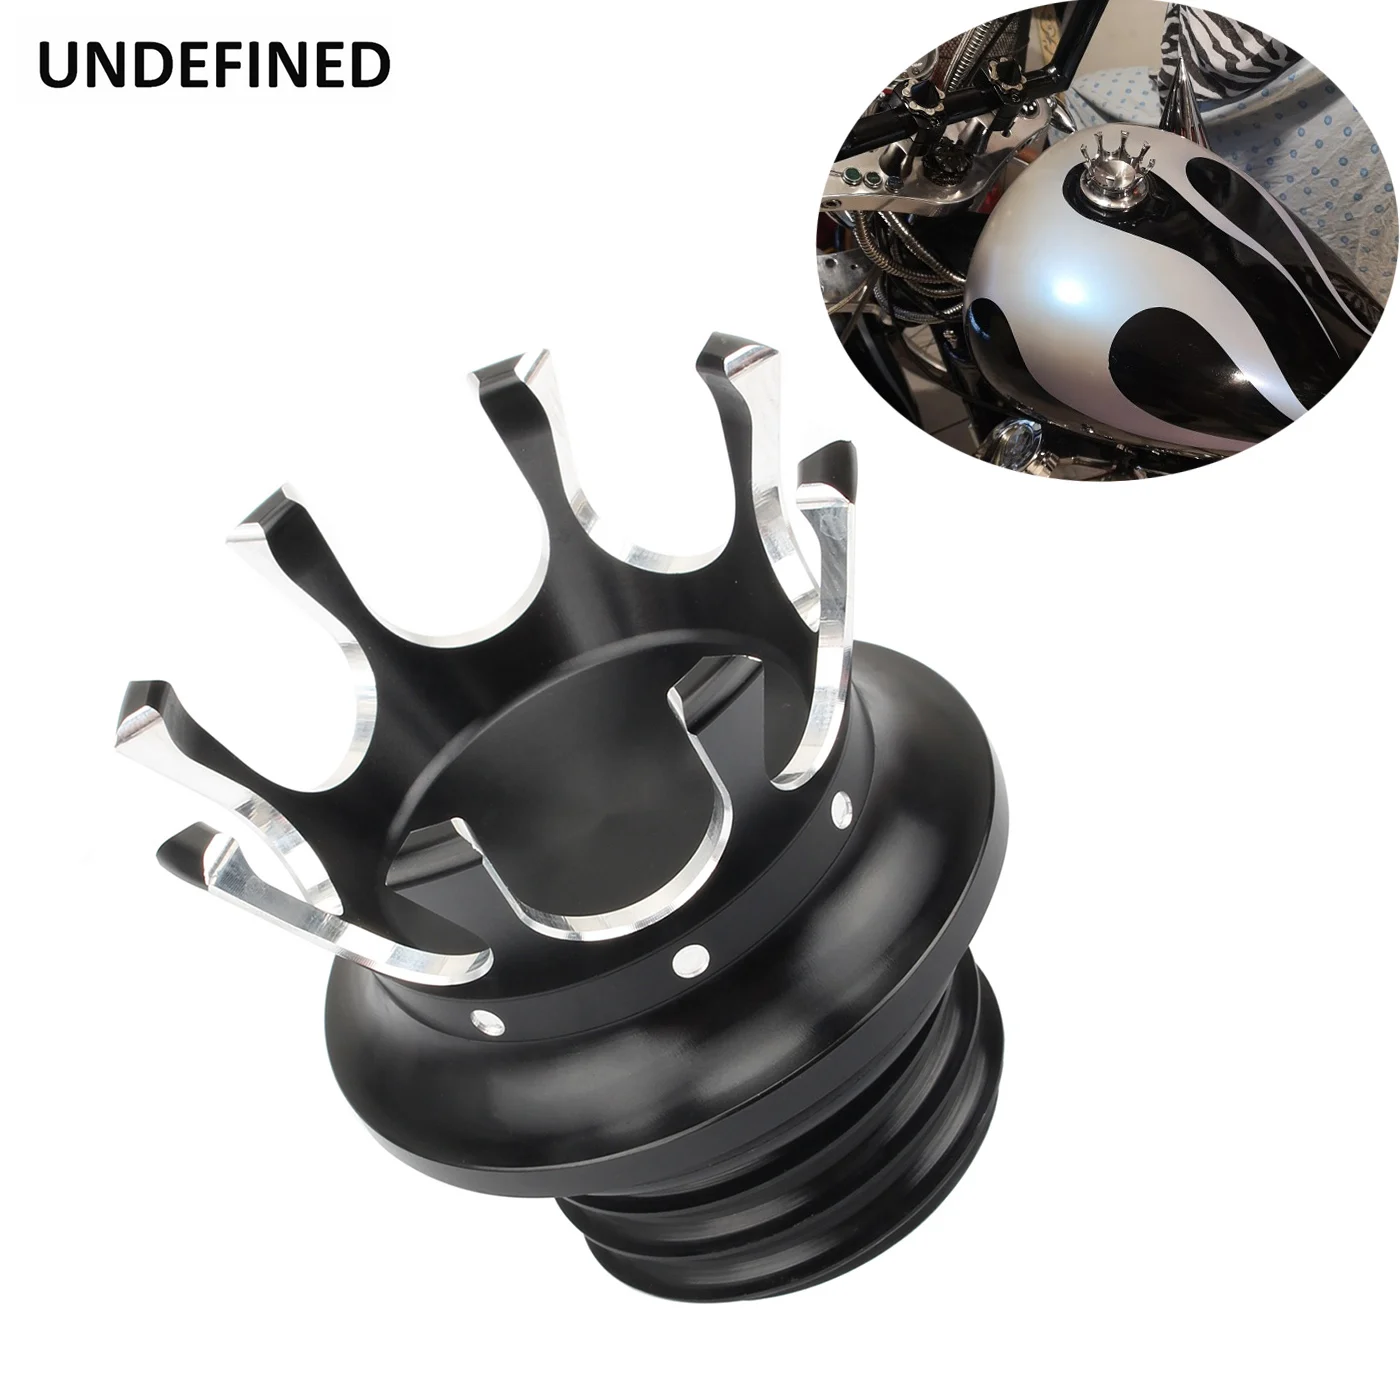 Motorcycle Fuel Gas Tank Cap Crown Style Black Oil Caps for Sportster XL 1200 883 48 Softail Dyna FLST Road King 